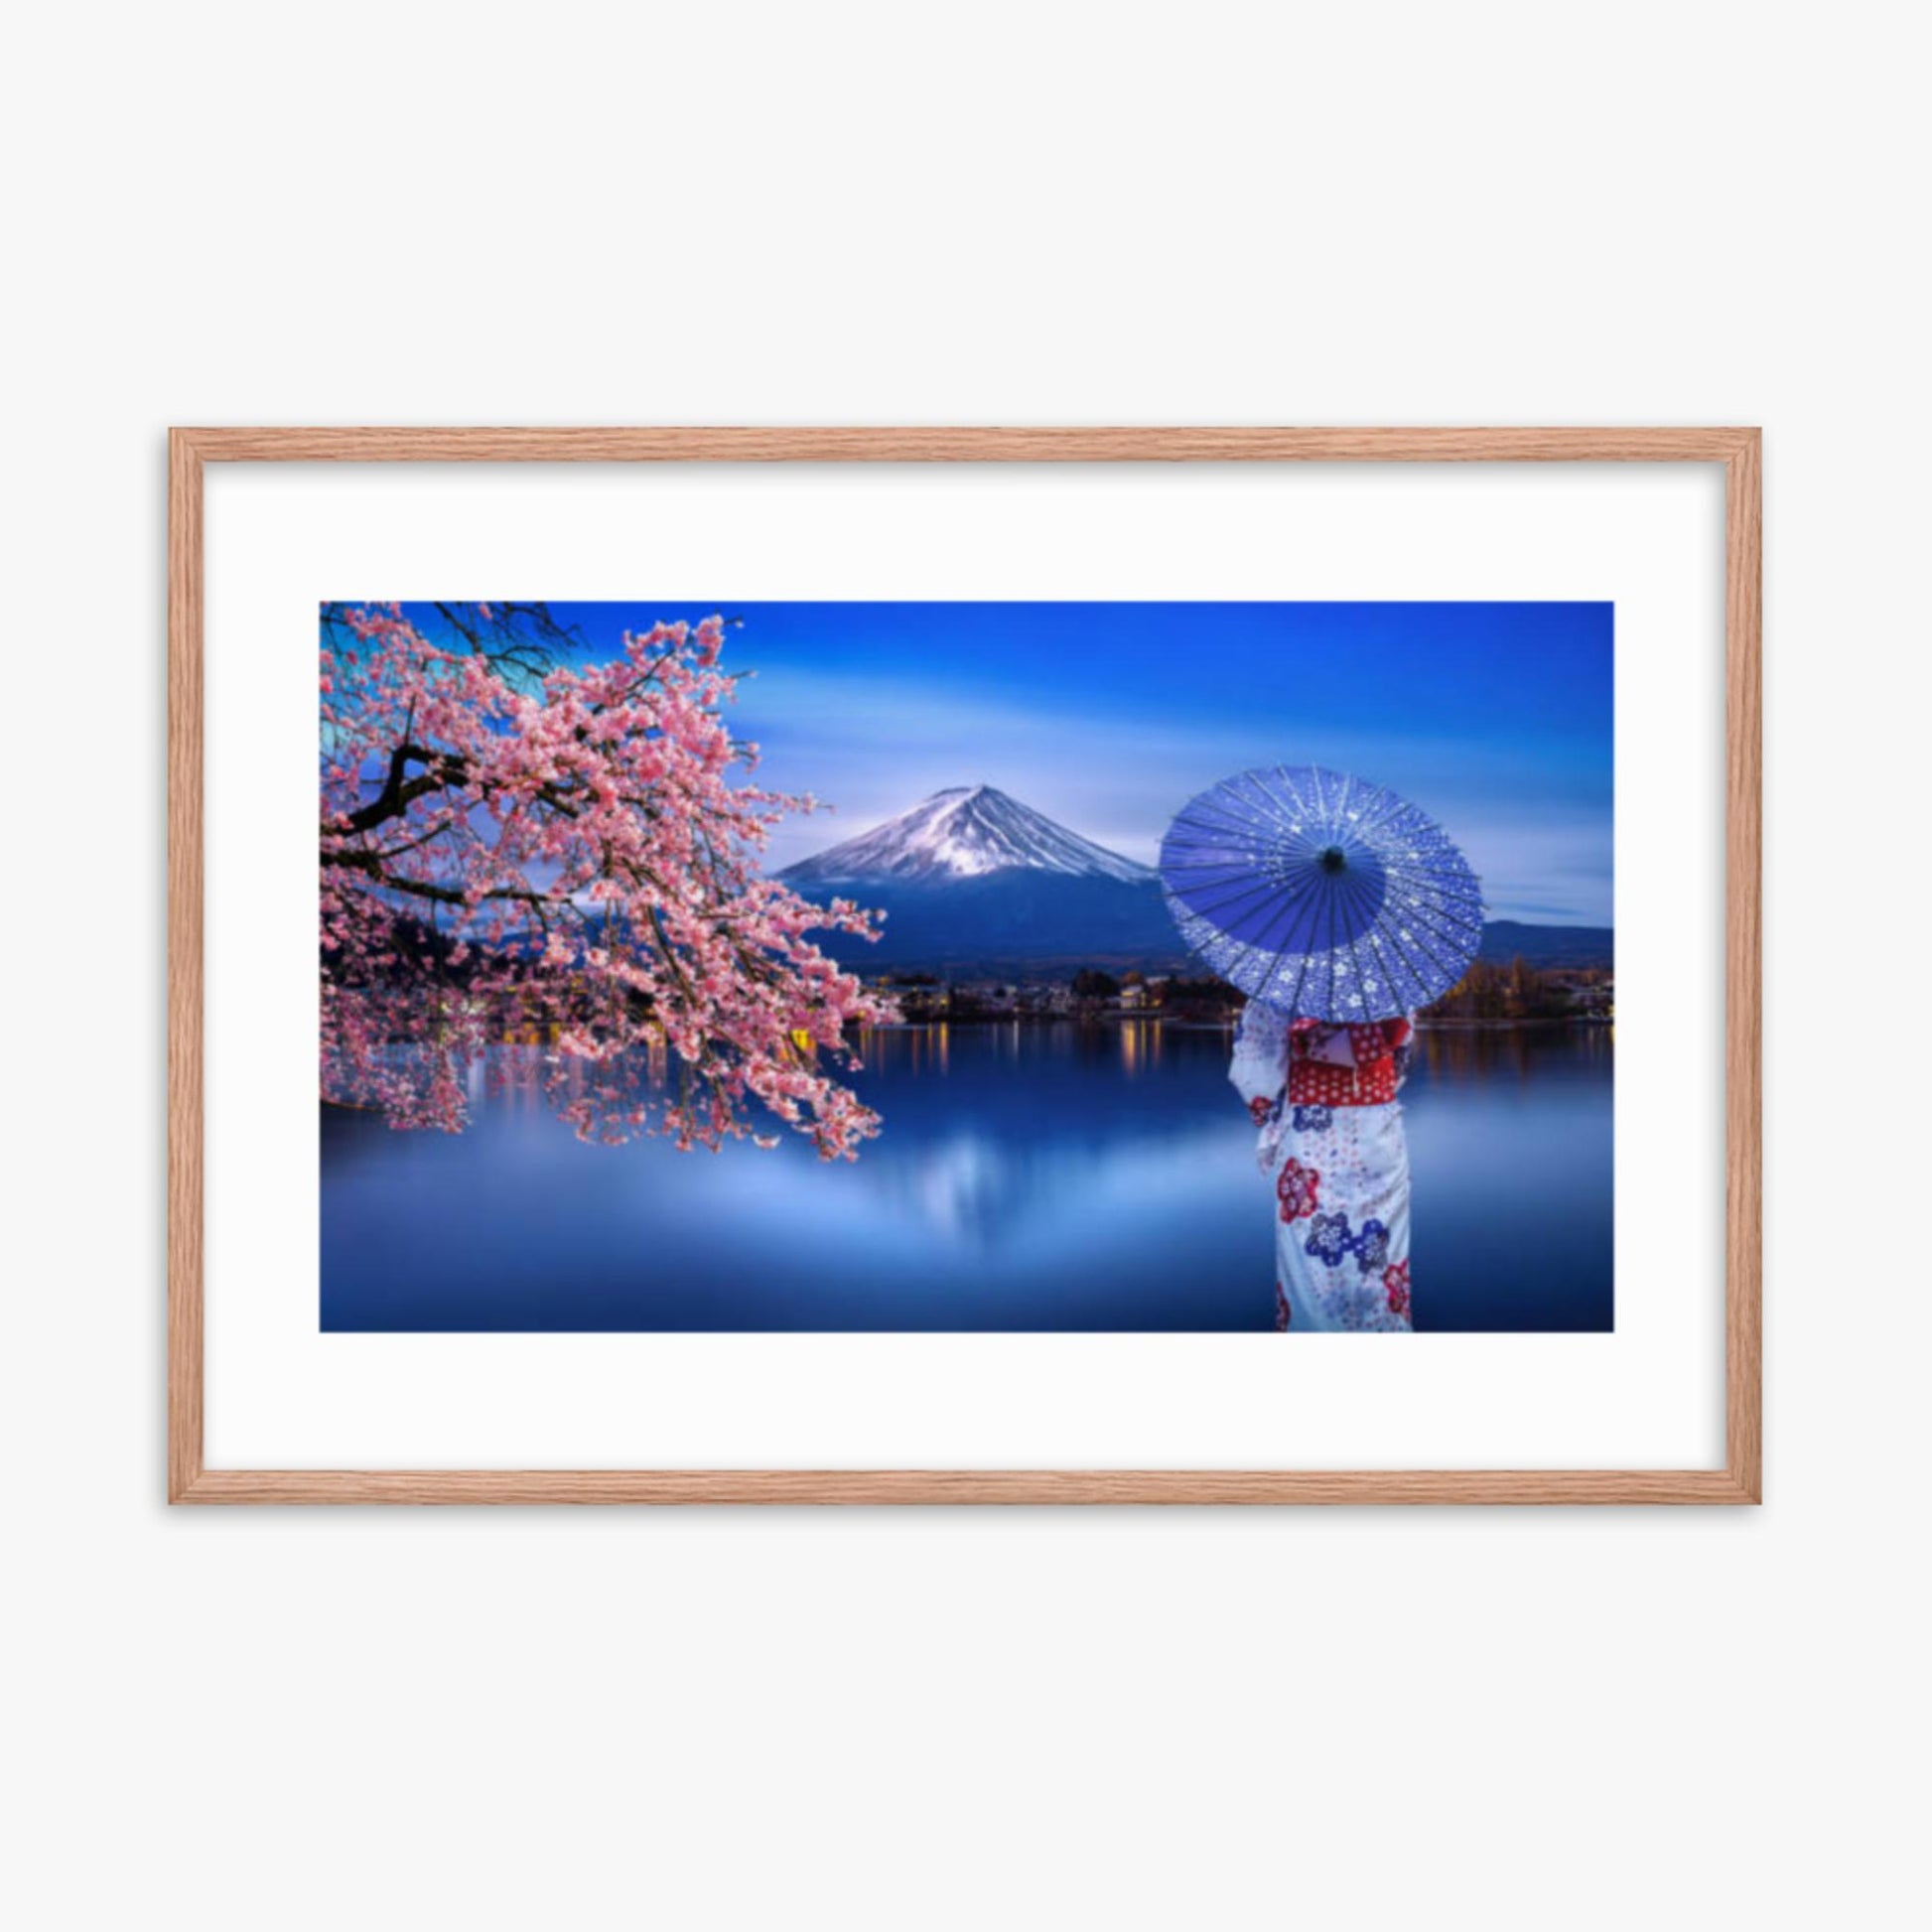 Asian woman wearing japanese traditional kimono at Fuji Mountain and cherry blossom, Kawaguchiko Lake in Japan 24x36 in Poster With Oak Frame